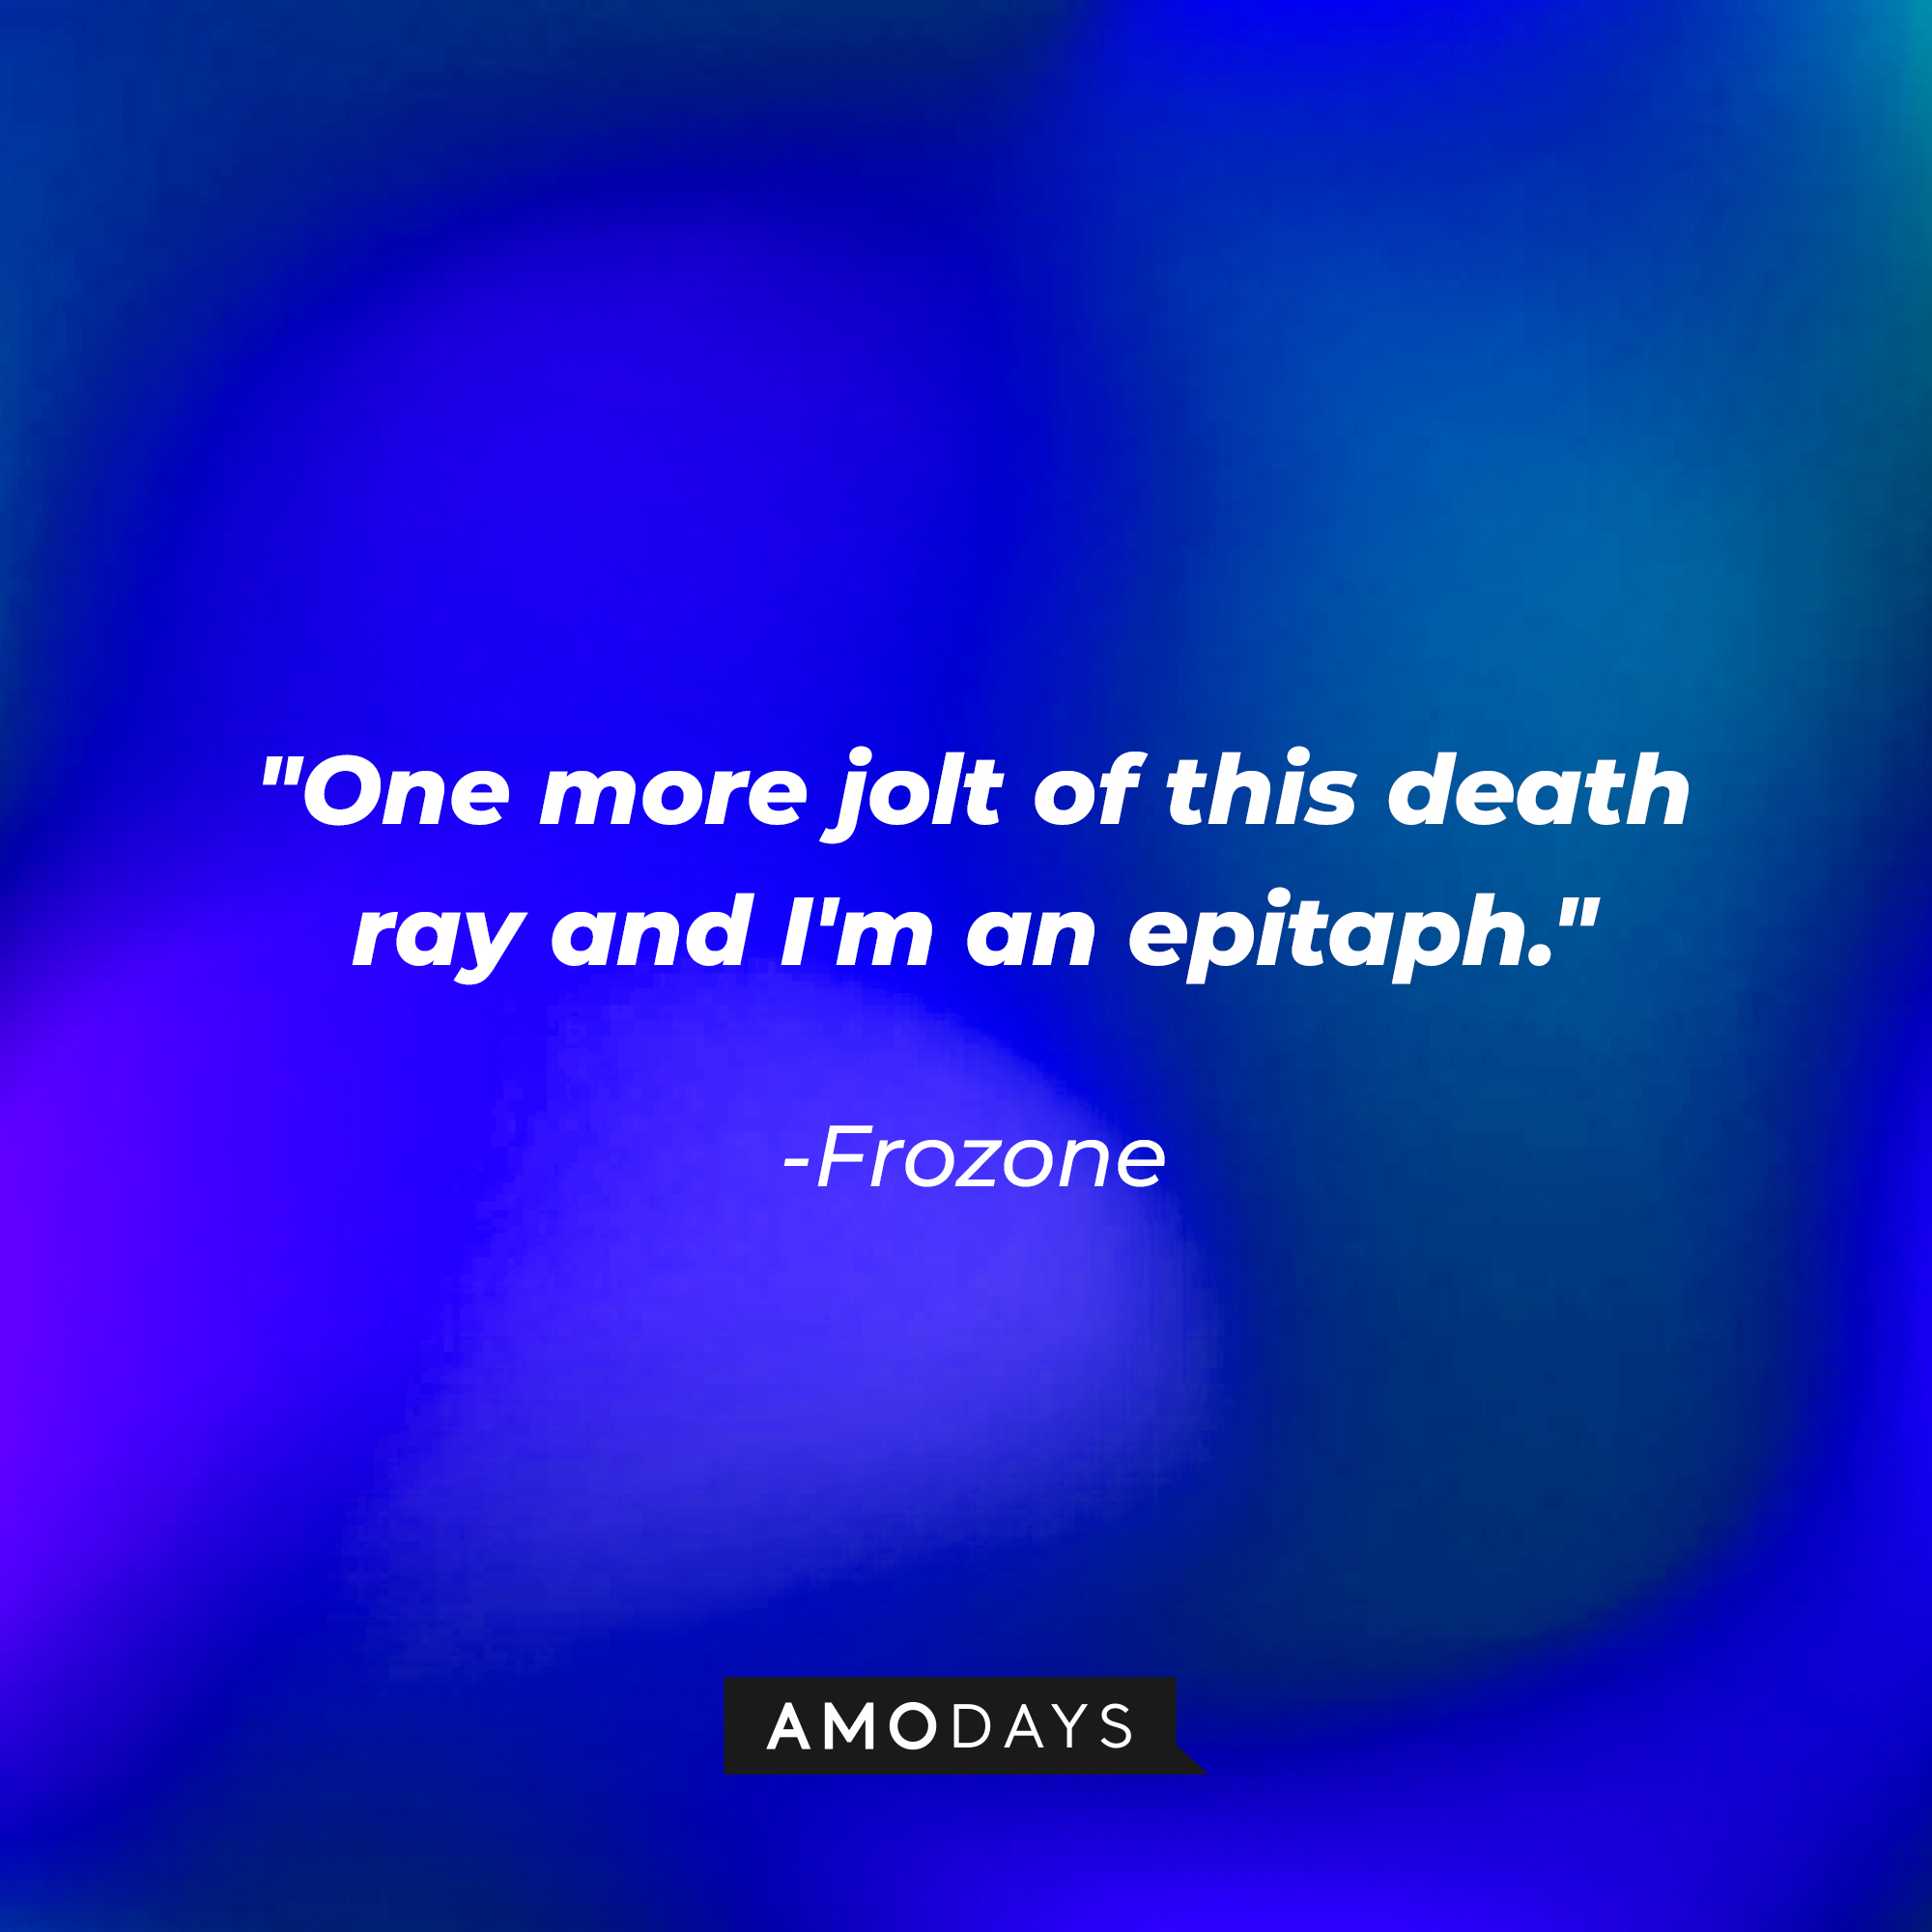 Frozone's quote: "One more jolt of this death ray and I'm an epitaph" | Source: Amodays